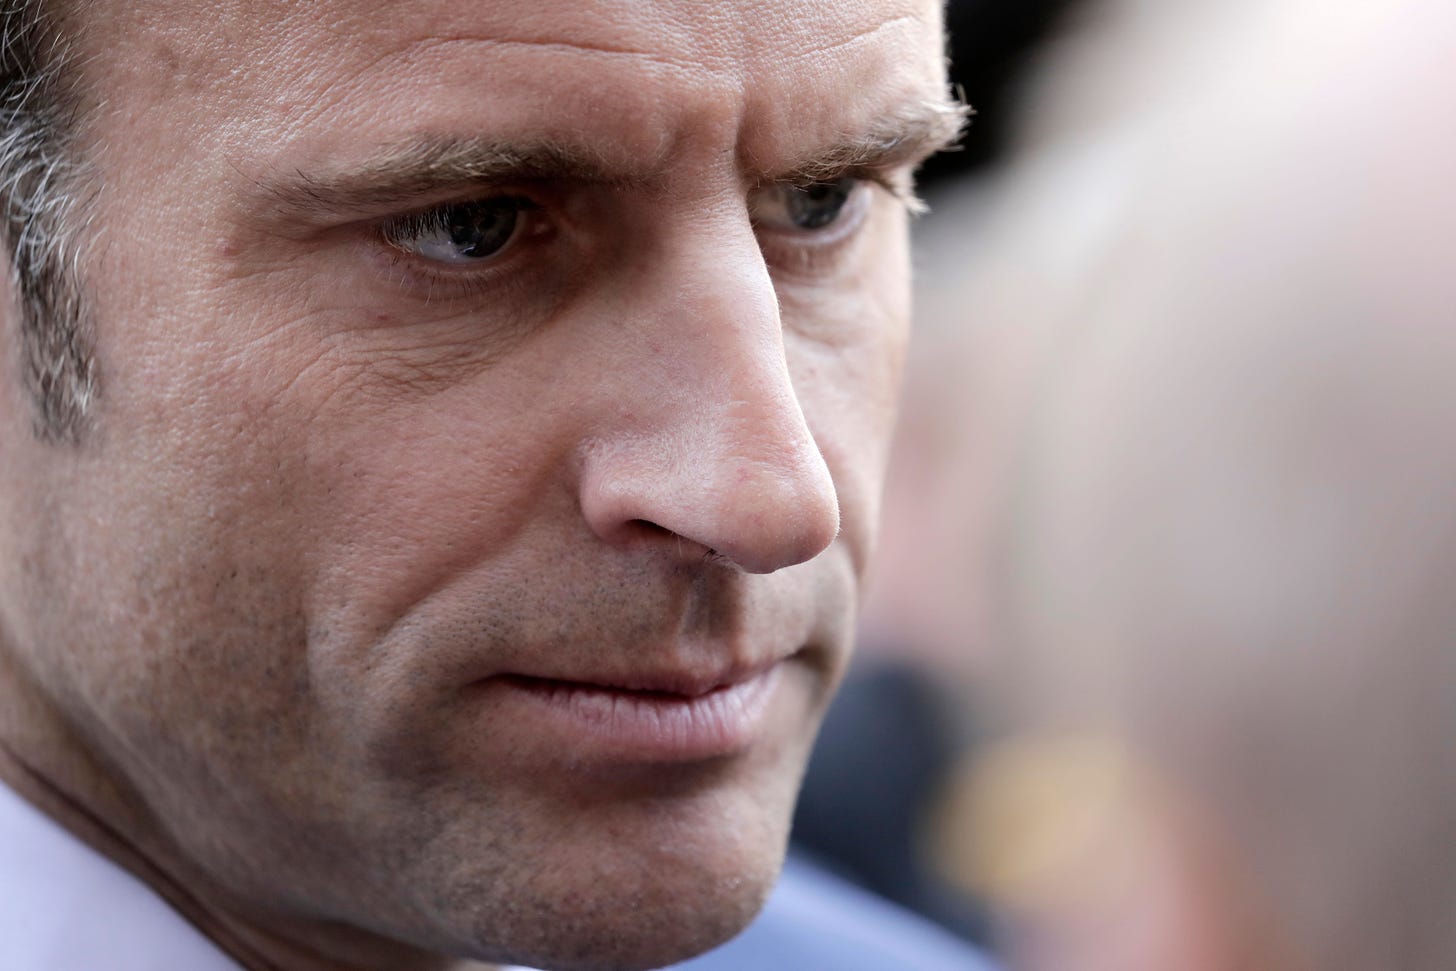 France's President and Republique en Marche (LREM) candidate for re-election Emmanuel Macron looks on as he speaks with onlookers while campaigning in Denain, northern France on April 11, 2022